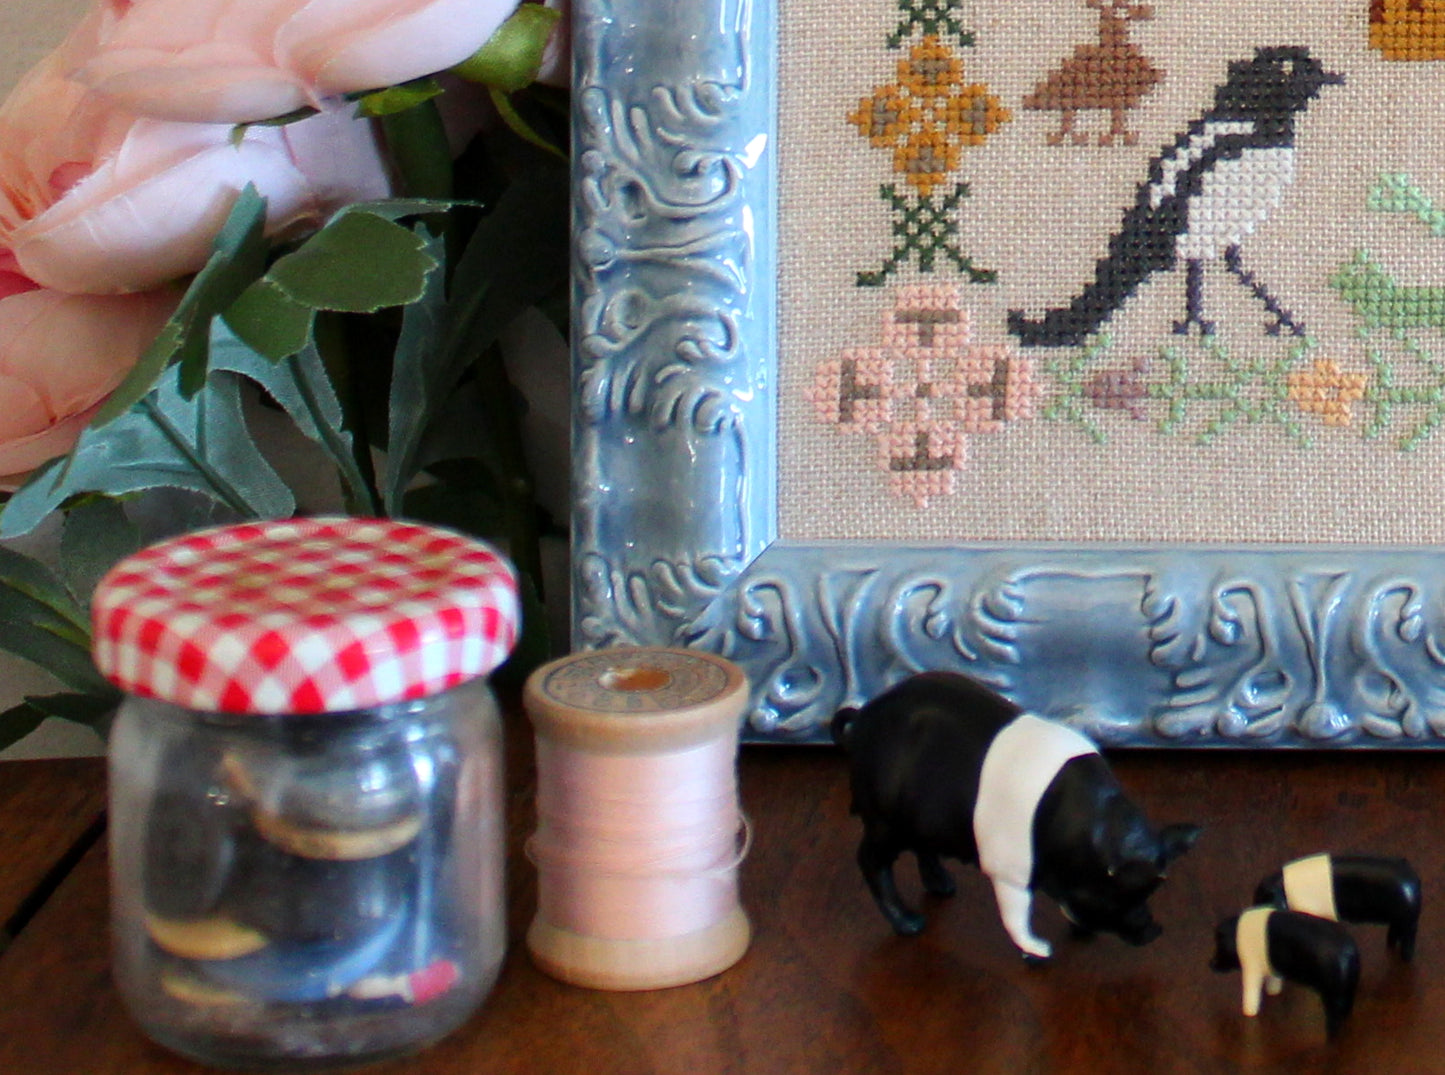 Funky Menagerie Cross Stitch Pattern by Lindy Stitches